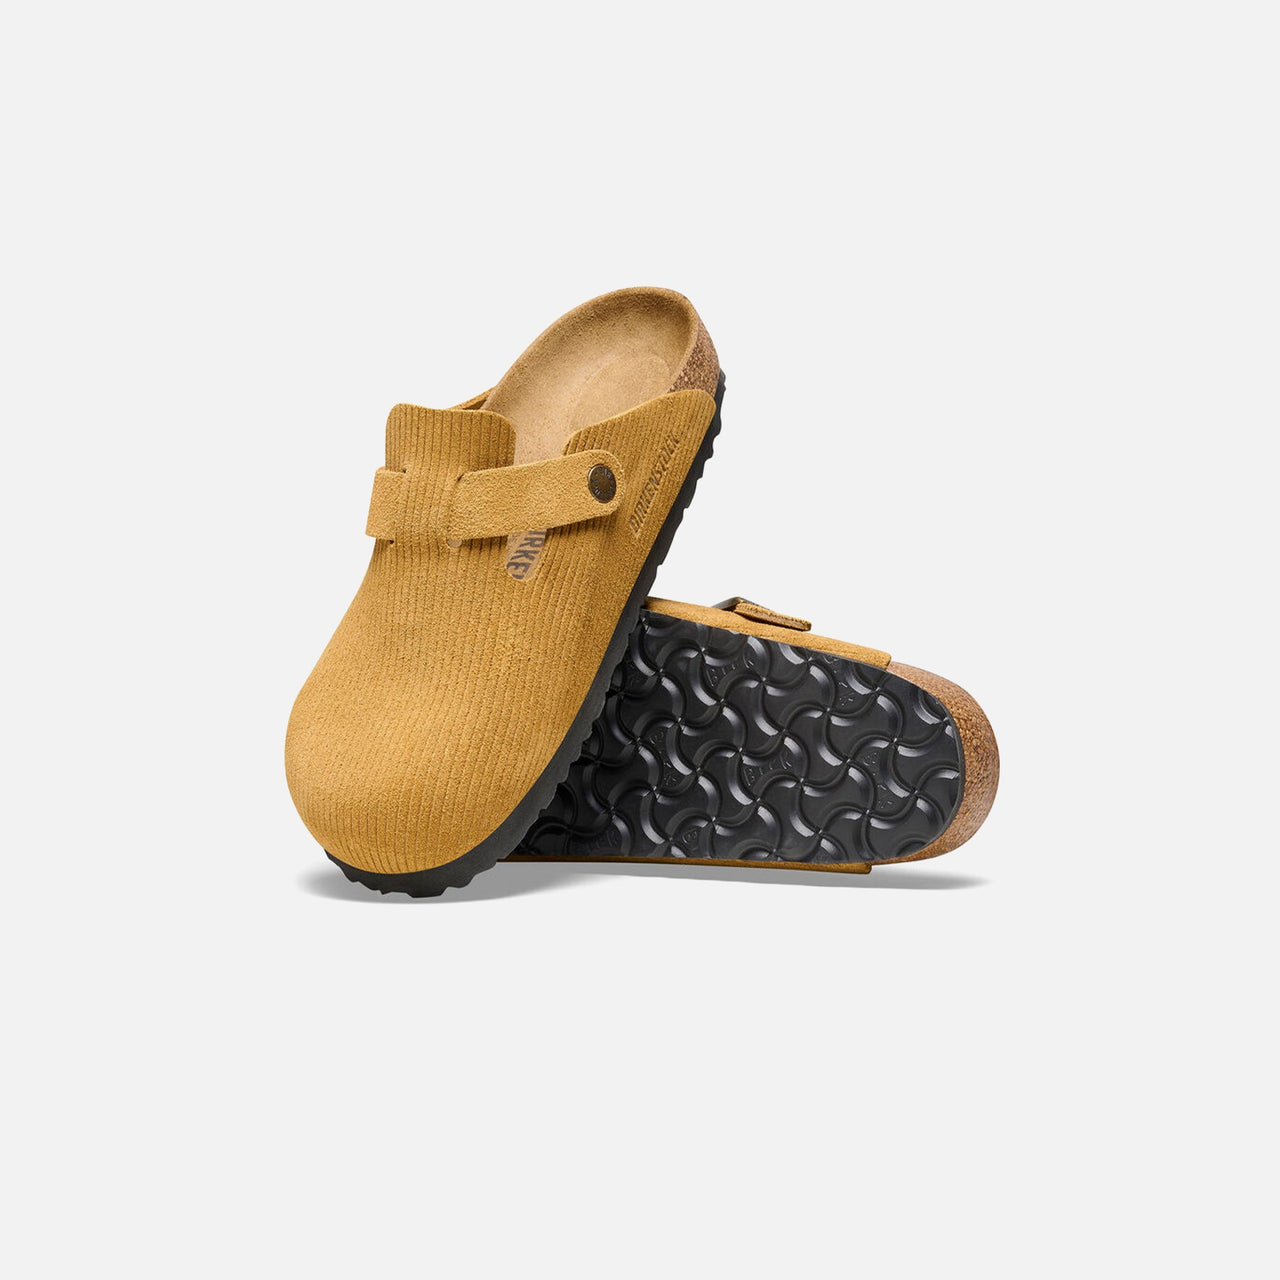 Brown Birkenstock Boston clogs made with high-quality corduroy and cork materials